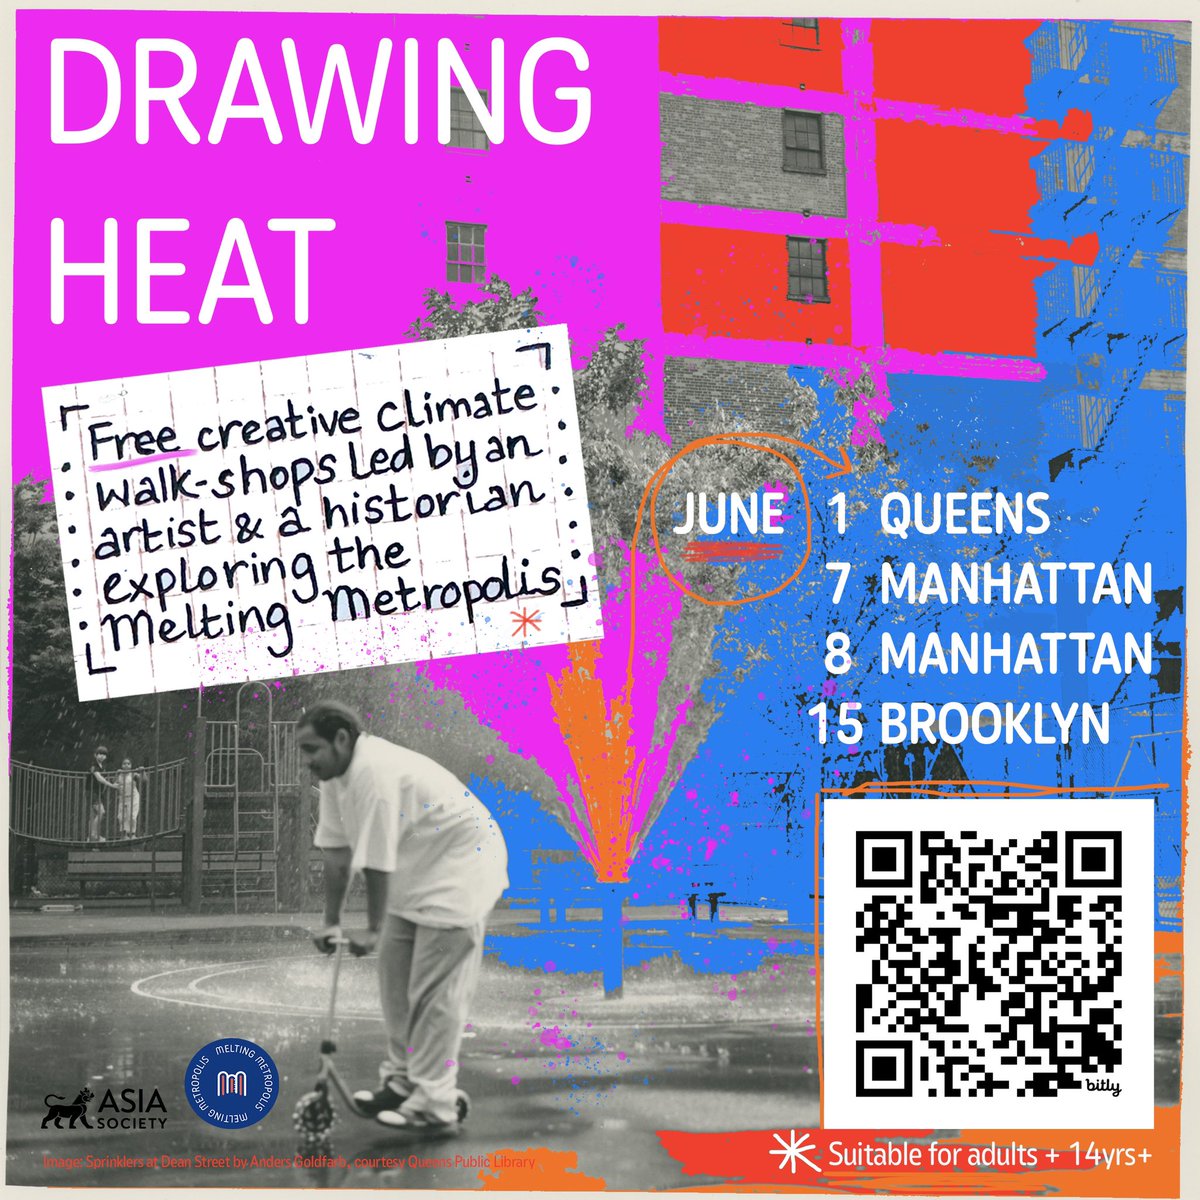 New York based? Interested in climate? history? art? Come on a free ‘Drawing Heat’ walk with @MeltingMetrop this June! Explore embodied histories of urban heat islands through experimental mark-making & urban history. No art / history background needed! meltingmetropolis.com/upcoming-events